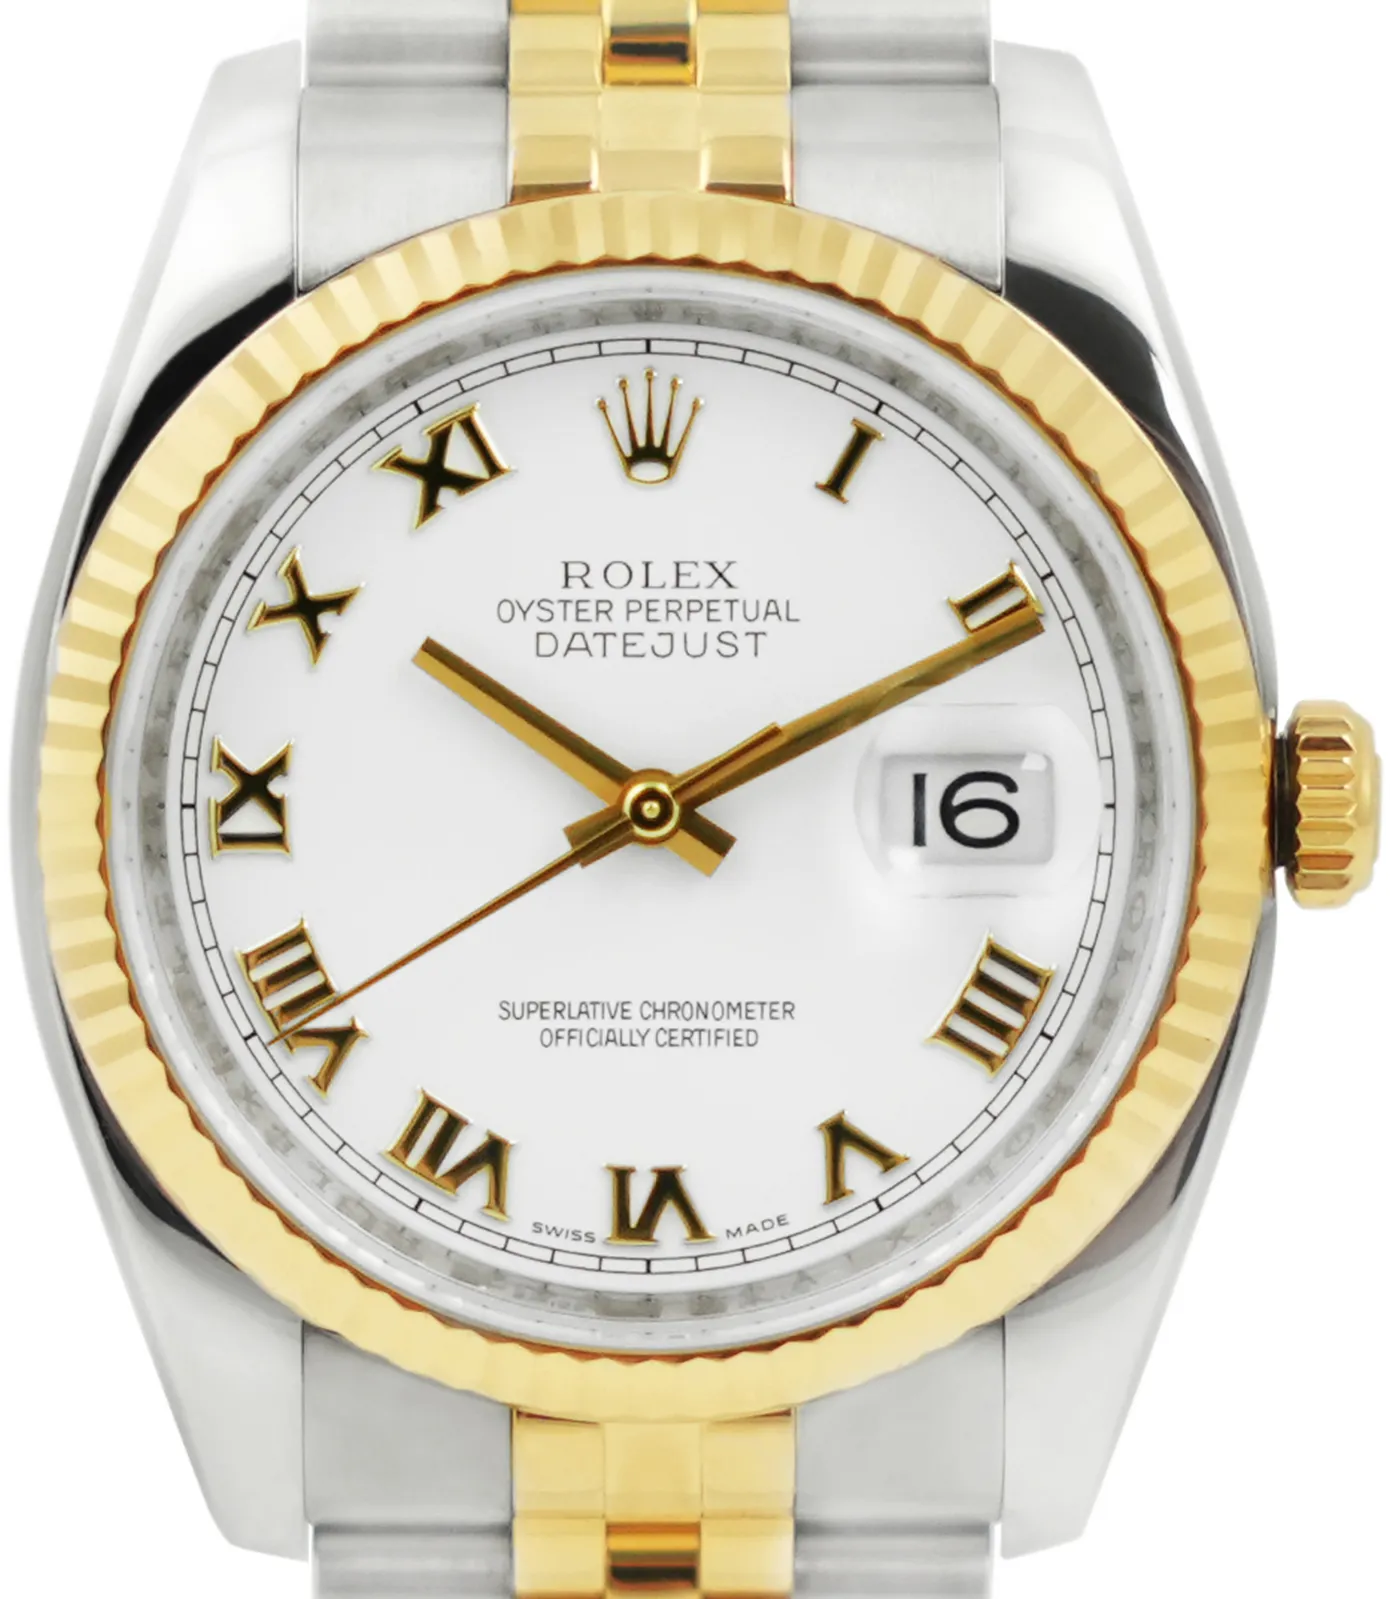 Rolex Datejust 116233 36mm Yellow gold and stainless steel White